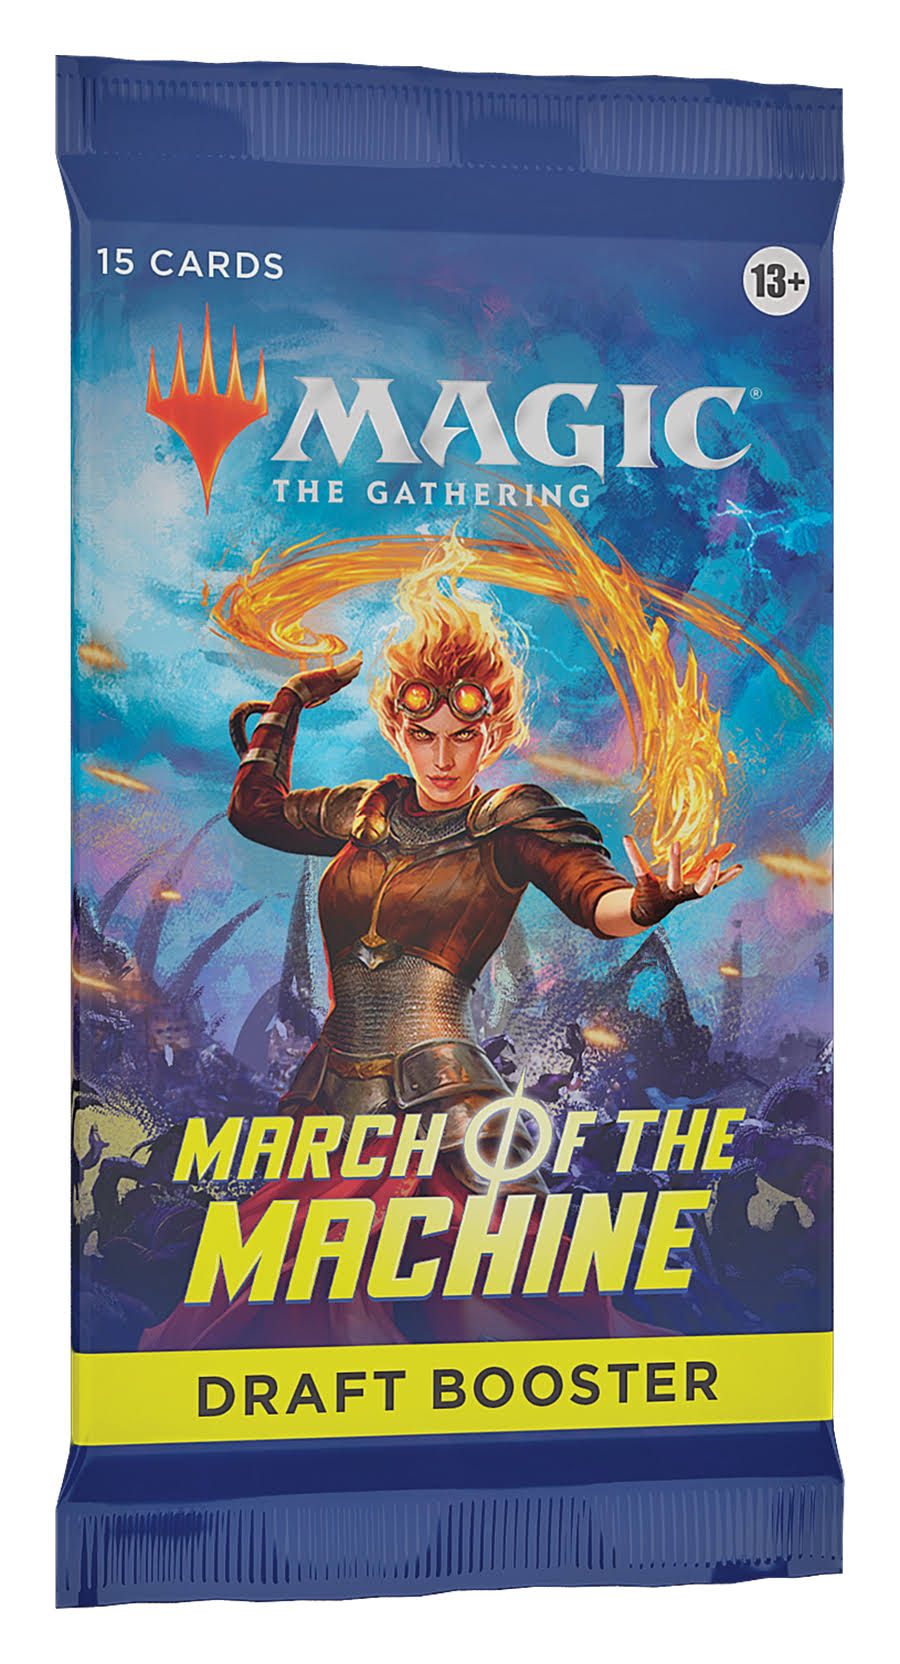 Magic The Gathering - March of The Machine Draft Booster